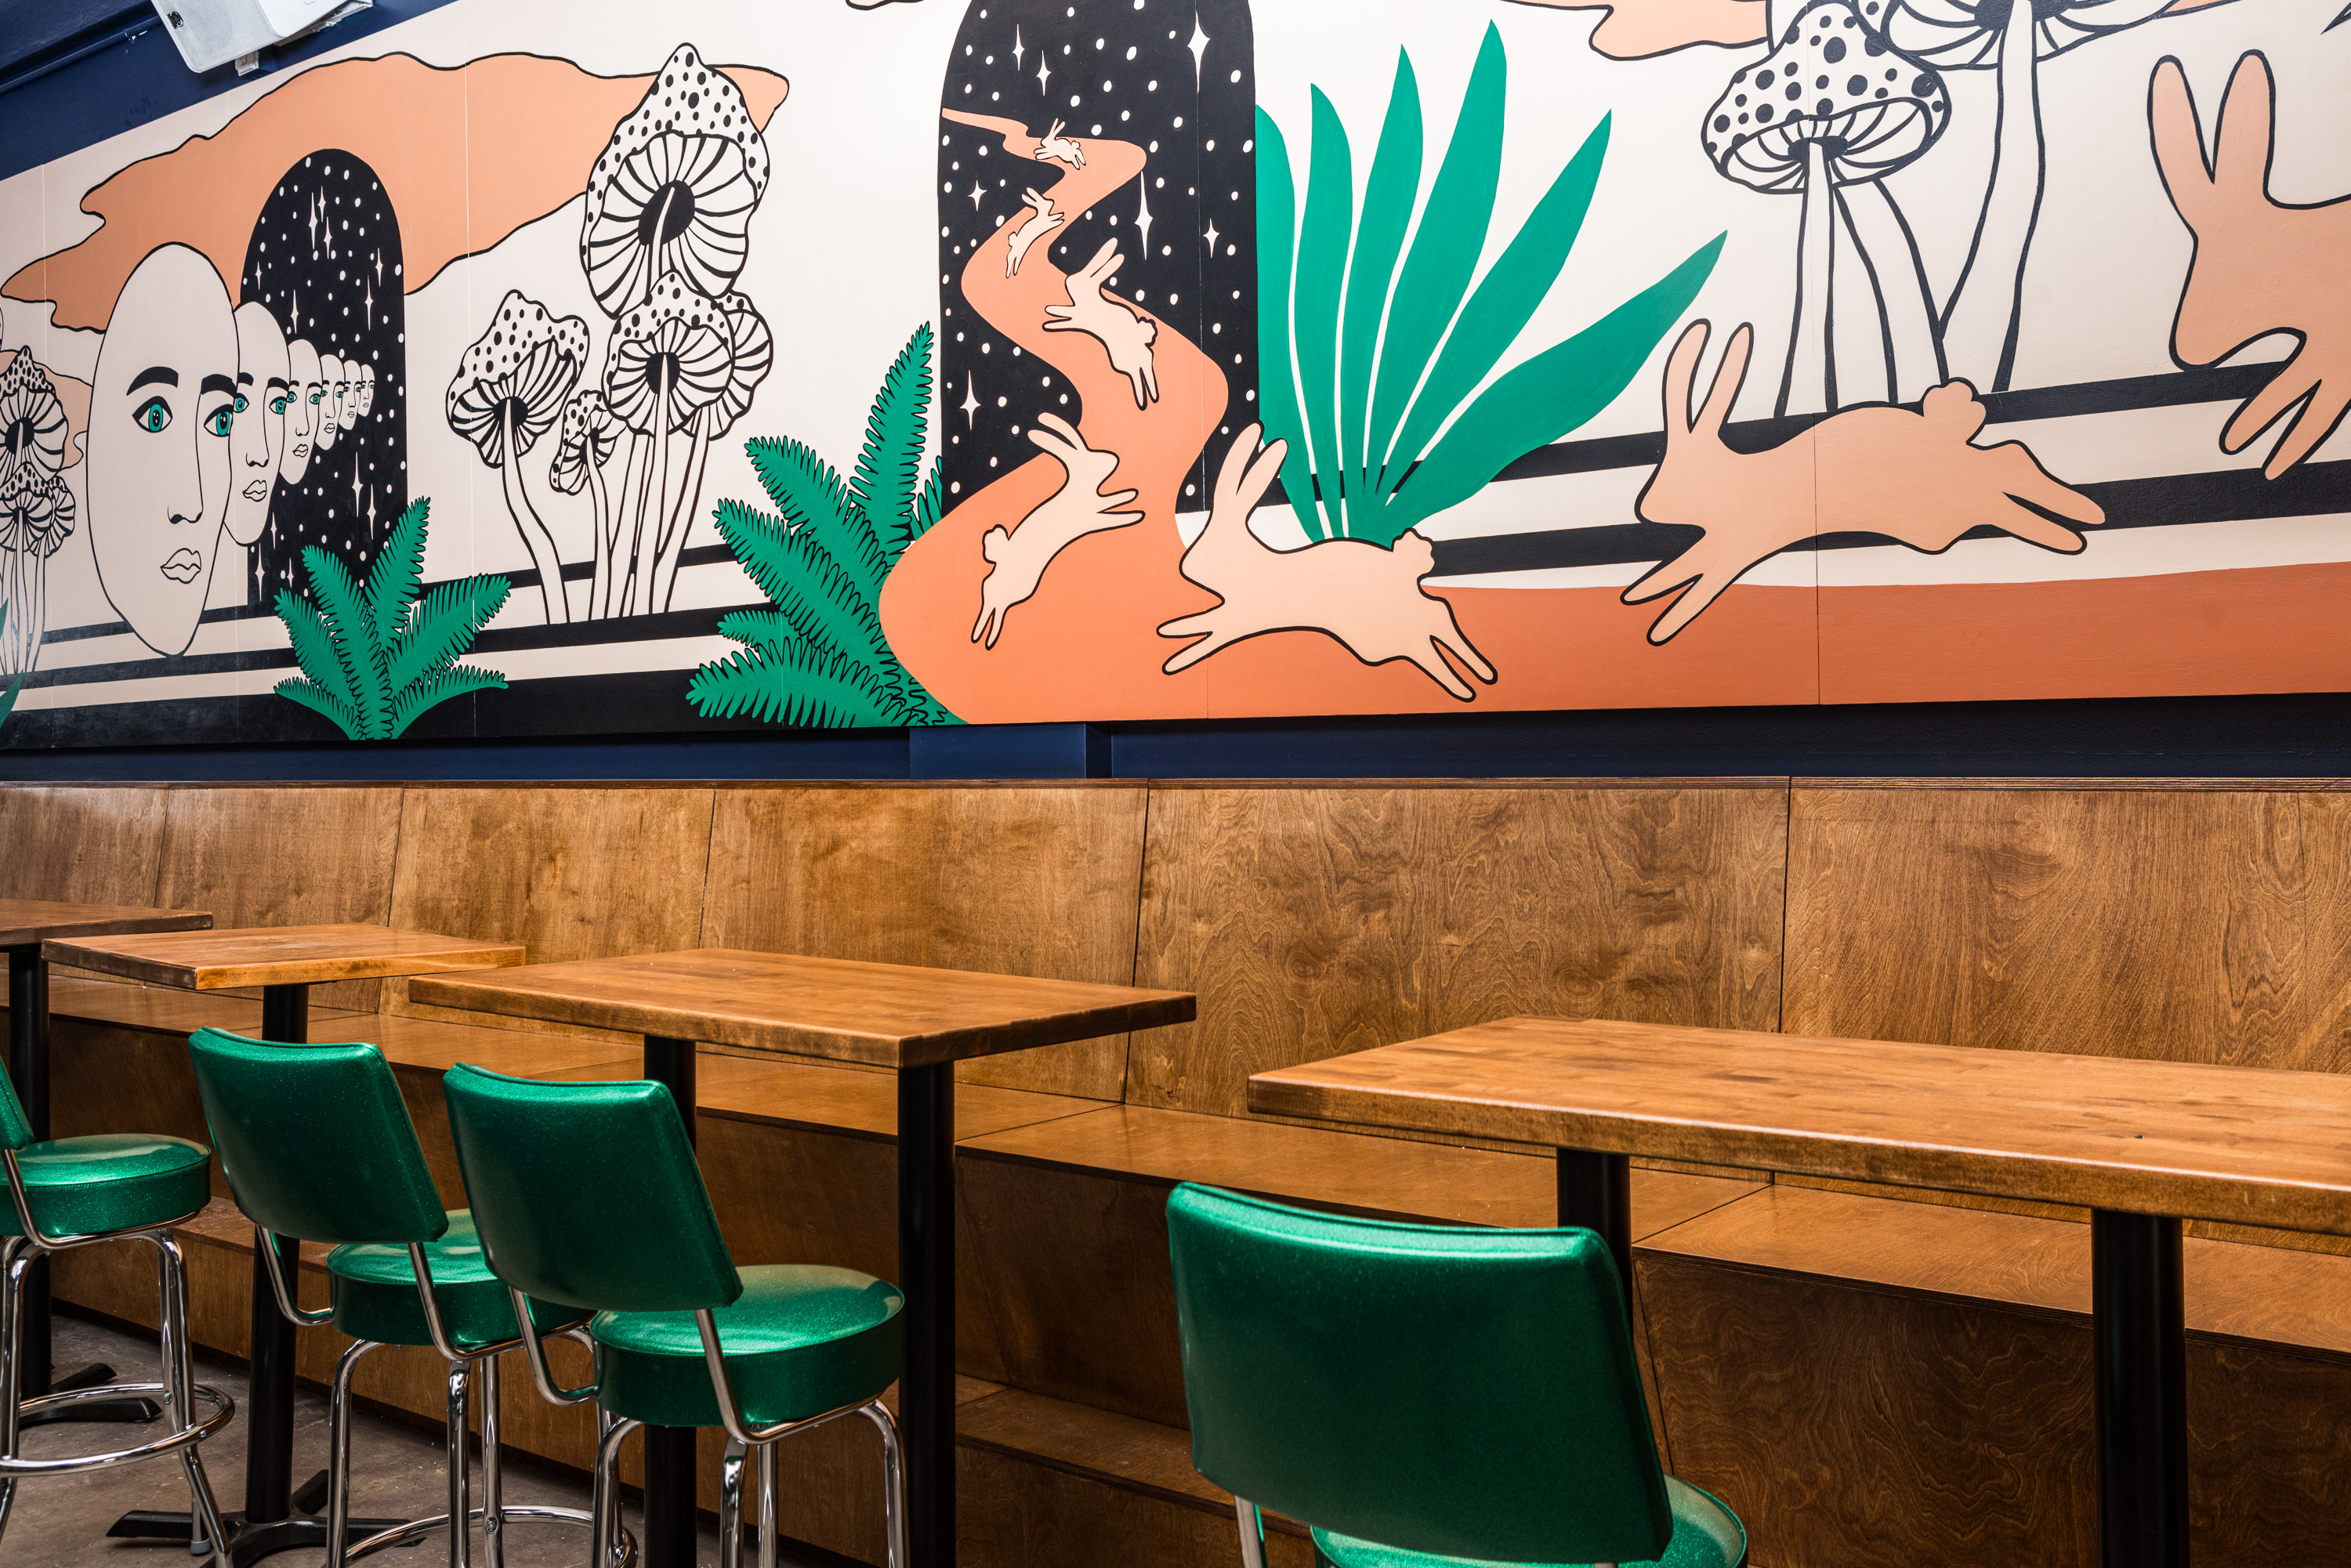 The interior of a bar with an art deco–style mural that shows rabbits running through a dessert among other things.